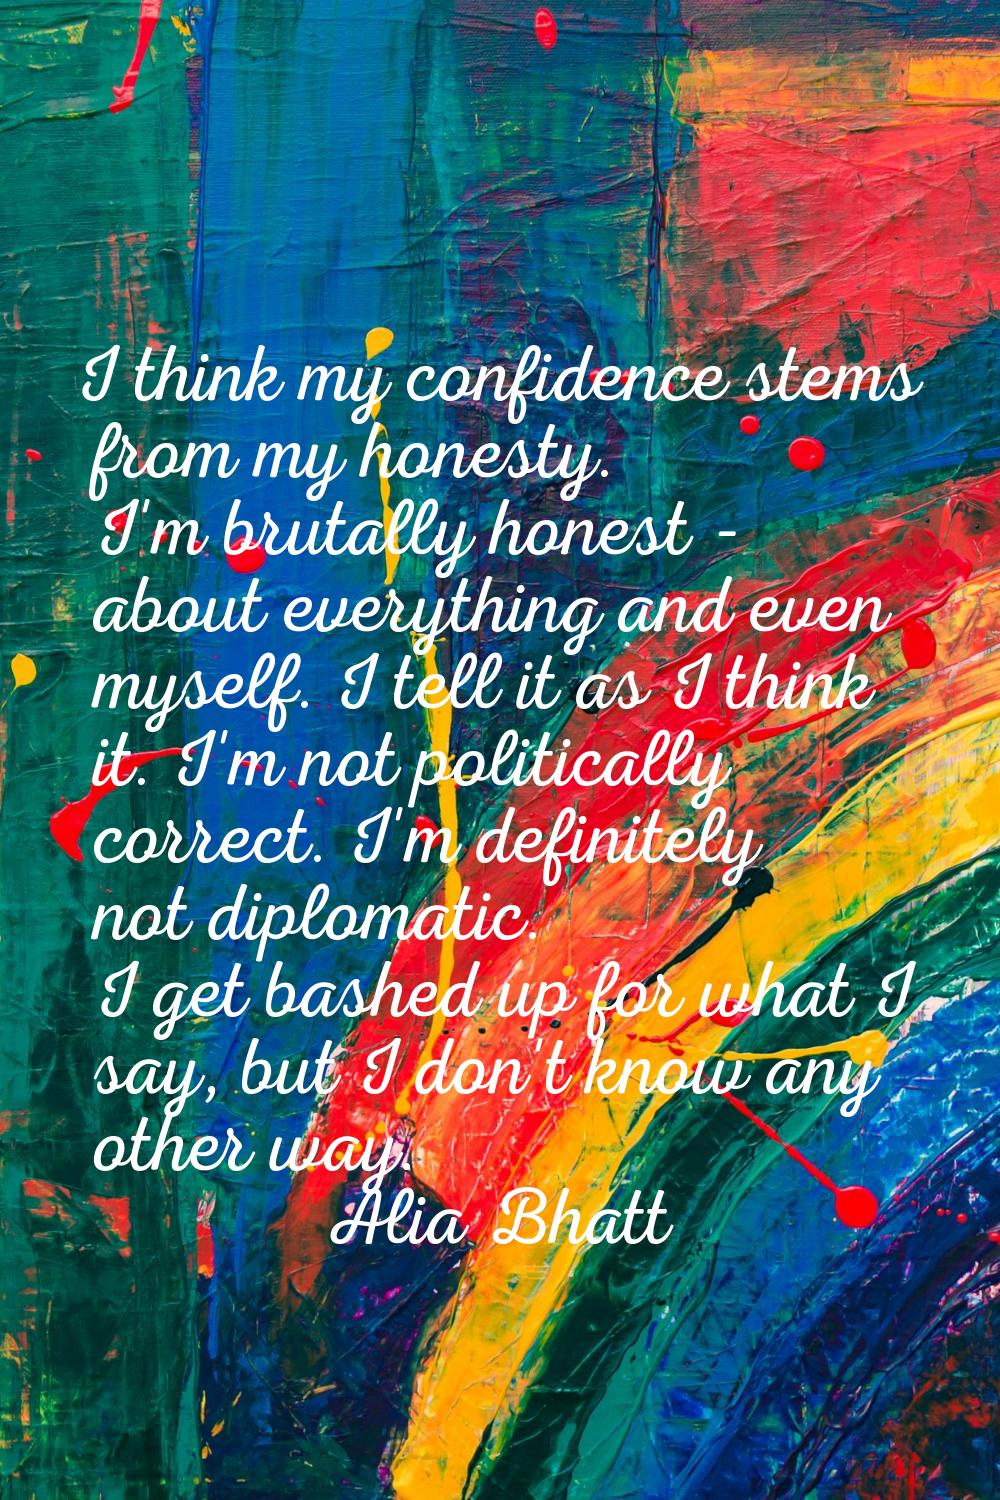 I think my confidence stems from my honesty. I'm brutally honest - about everything and even myself